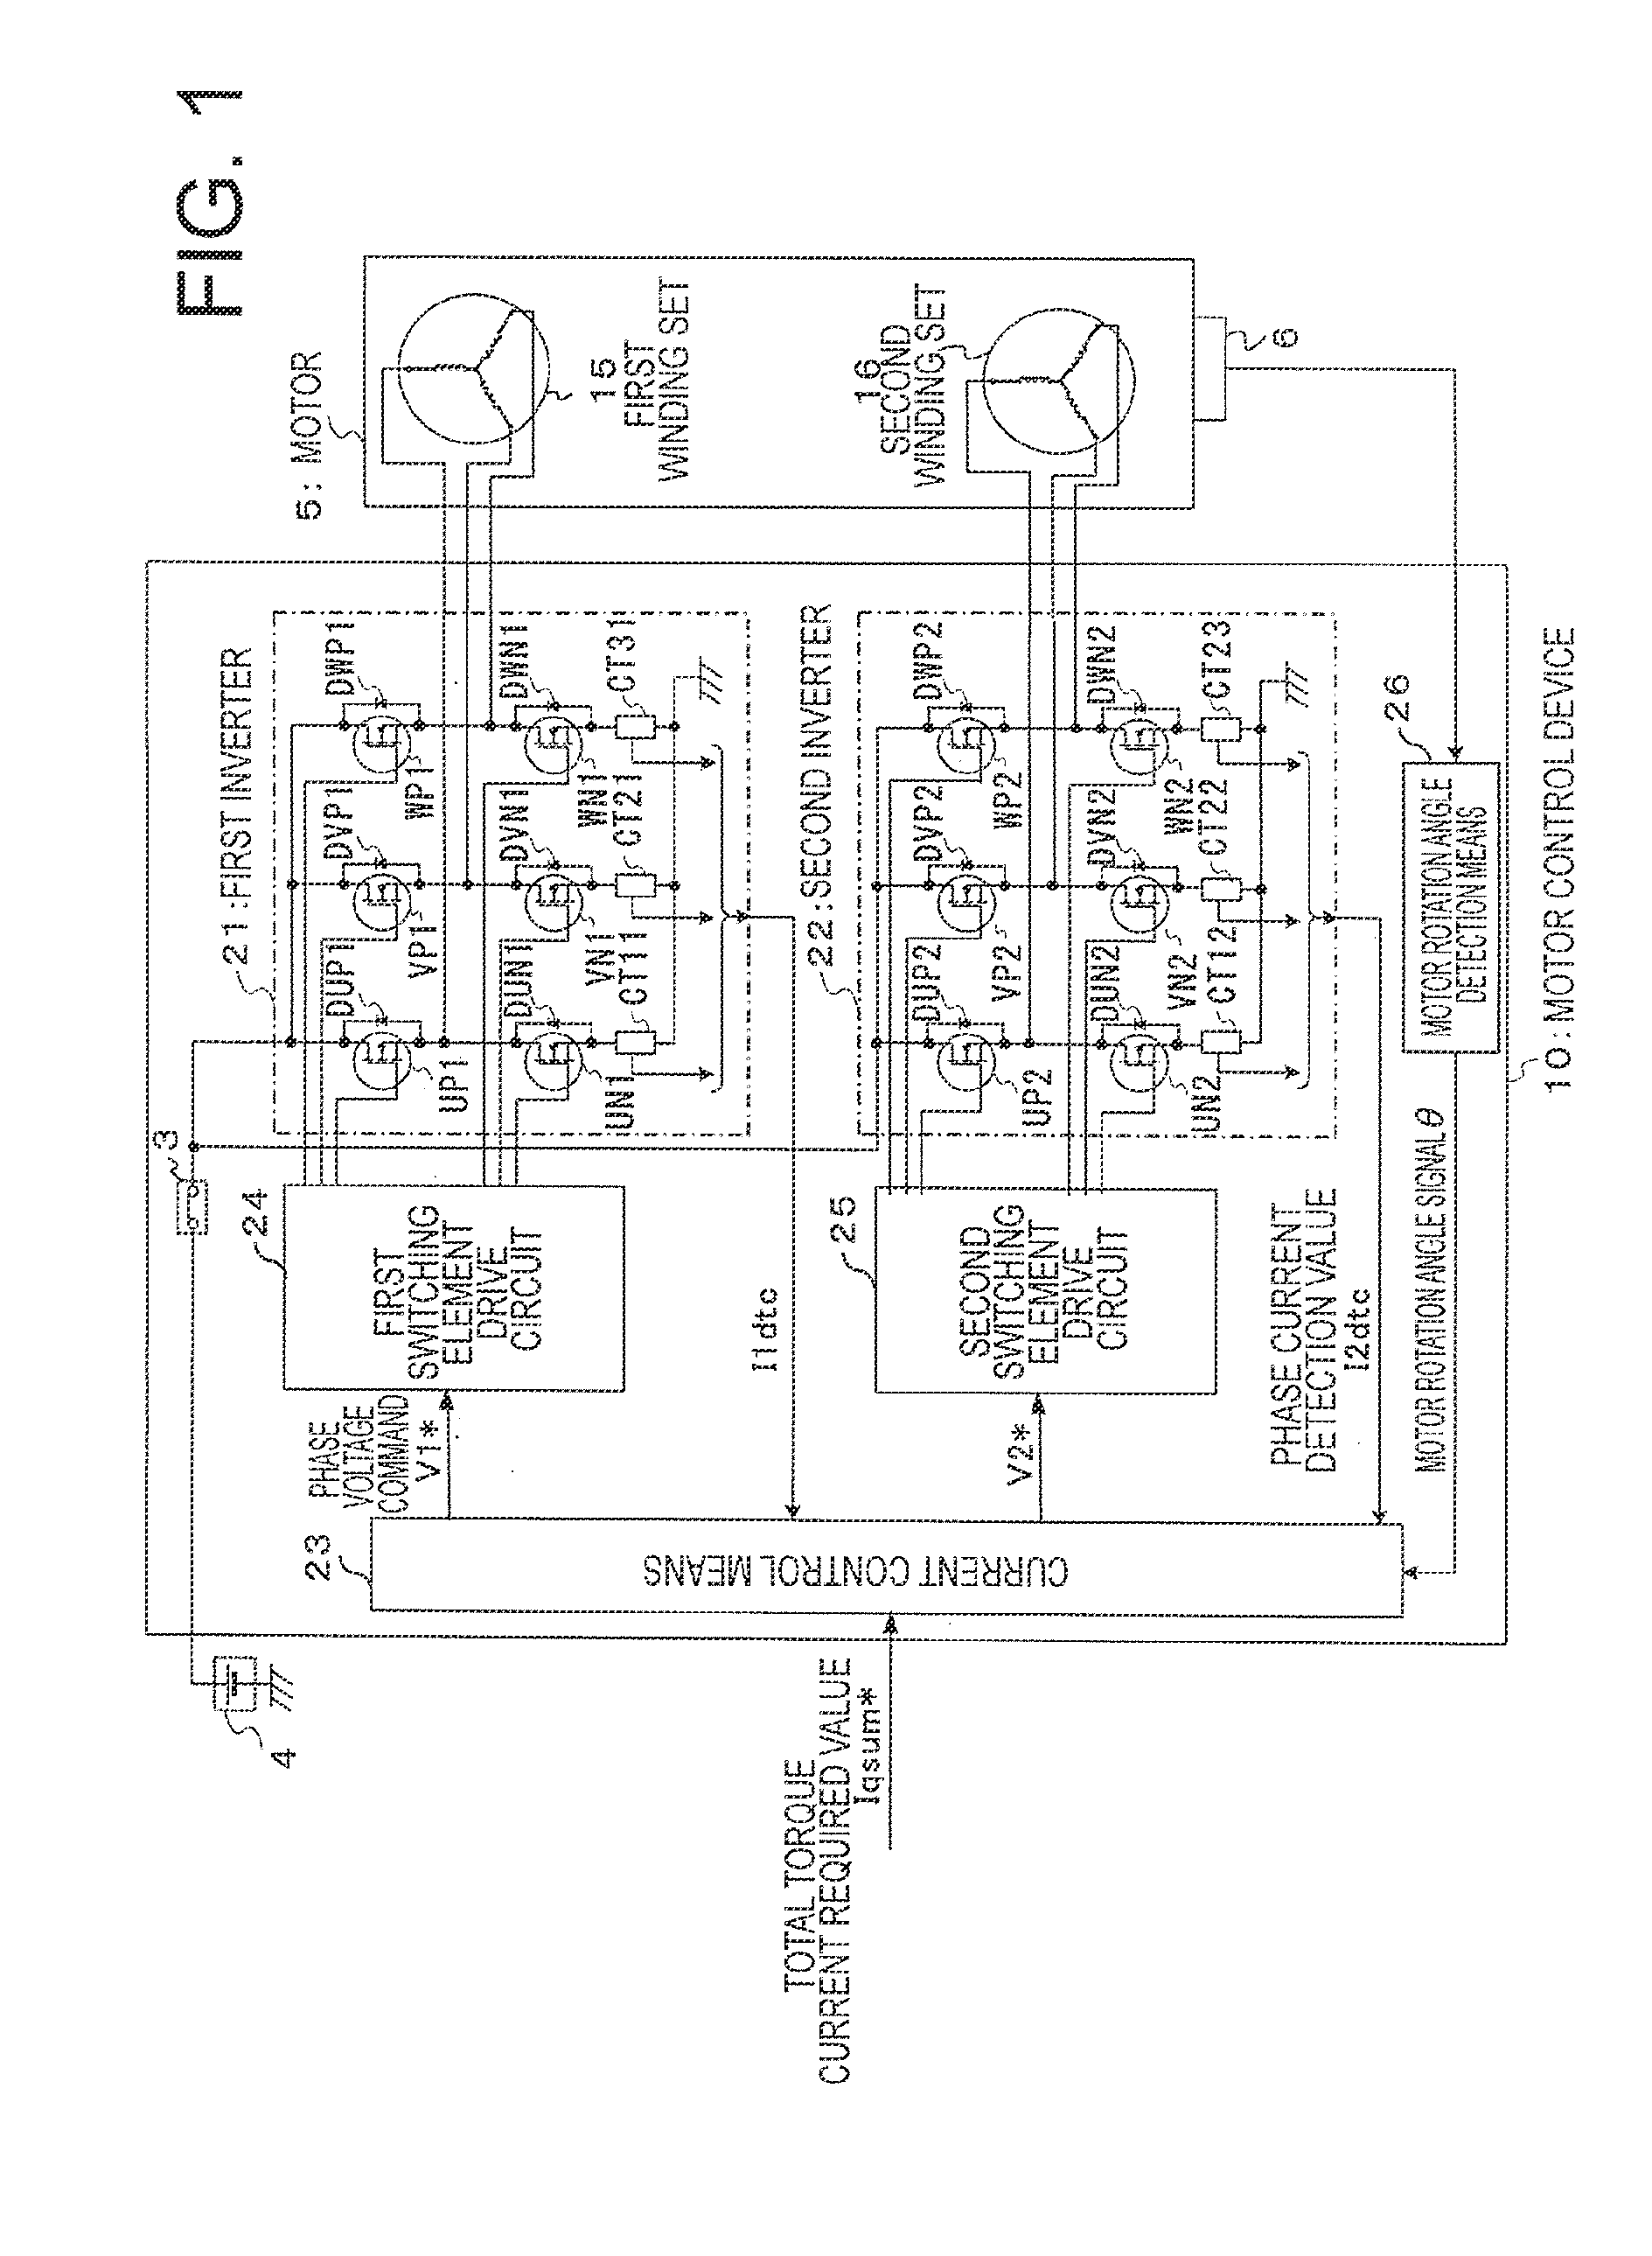 Motor control device, current control method applied to motor control device, and electric power steering device using motor control device